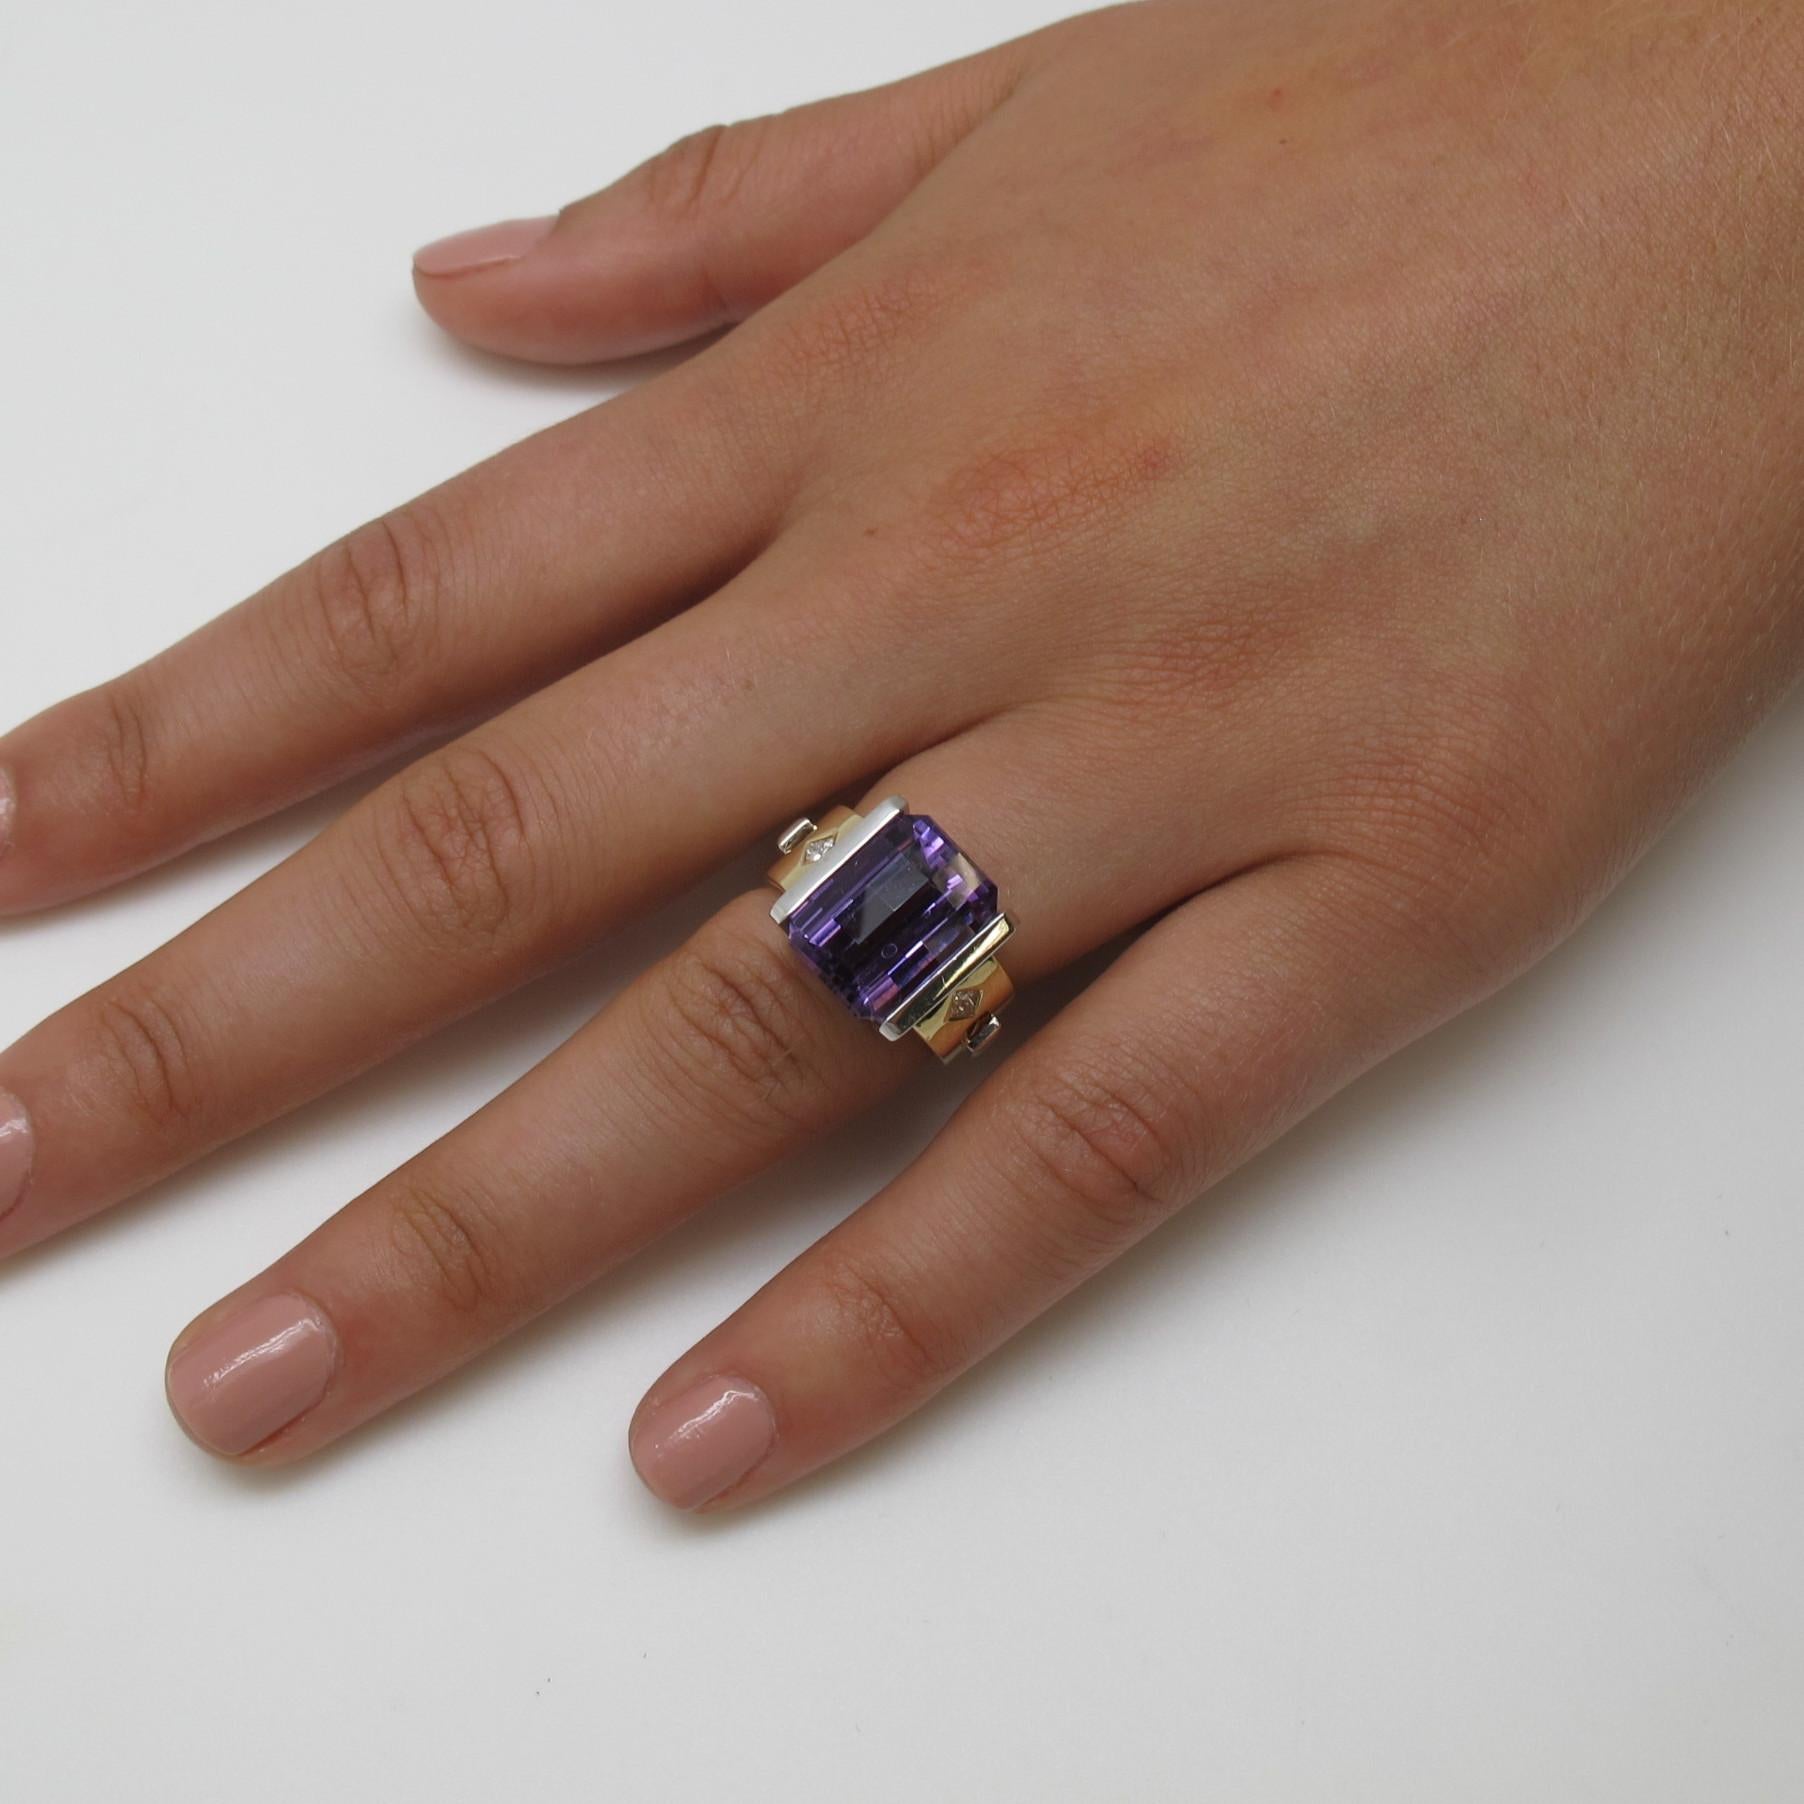 This unique ring is undeniably striking. The combination of both 18K white and yellow gold and the distinct detailing  along the sides makes this ring truly one of a kind. The emerald cut, checkerboard amethyst measures 13.5x10.5 (8.33 carats), two